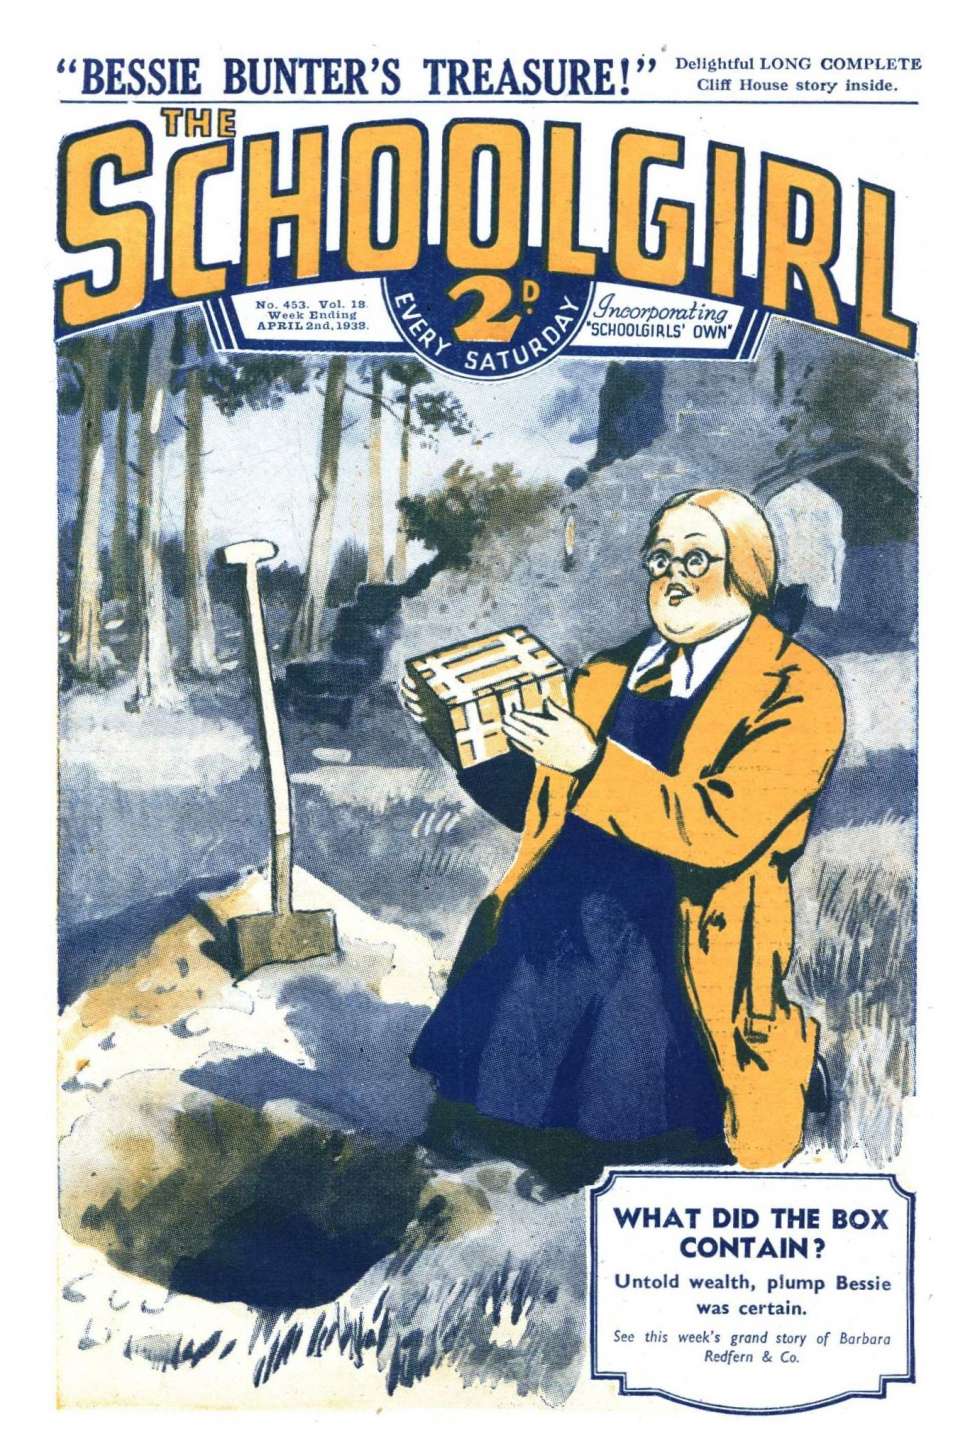 Book Cover For The Schoolgirl 453